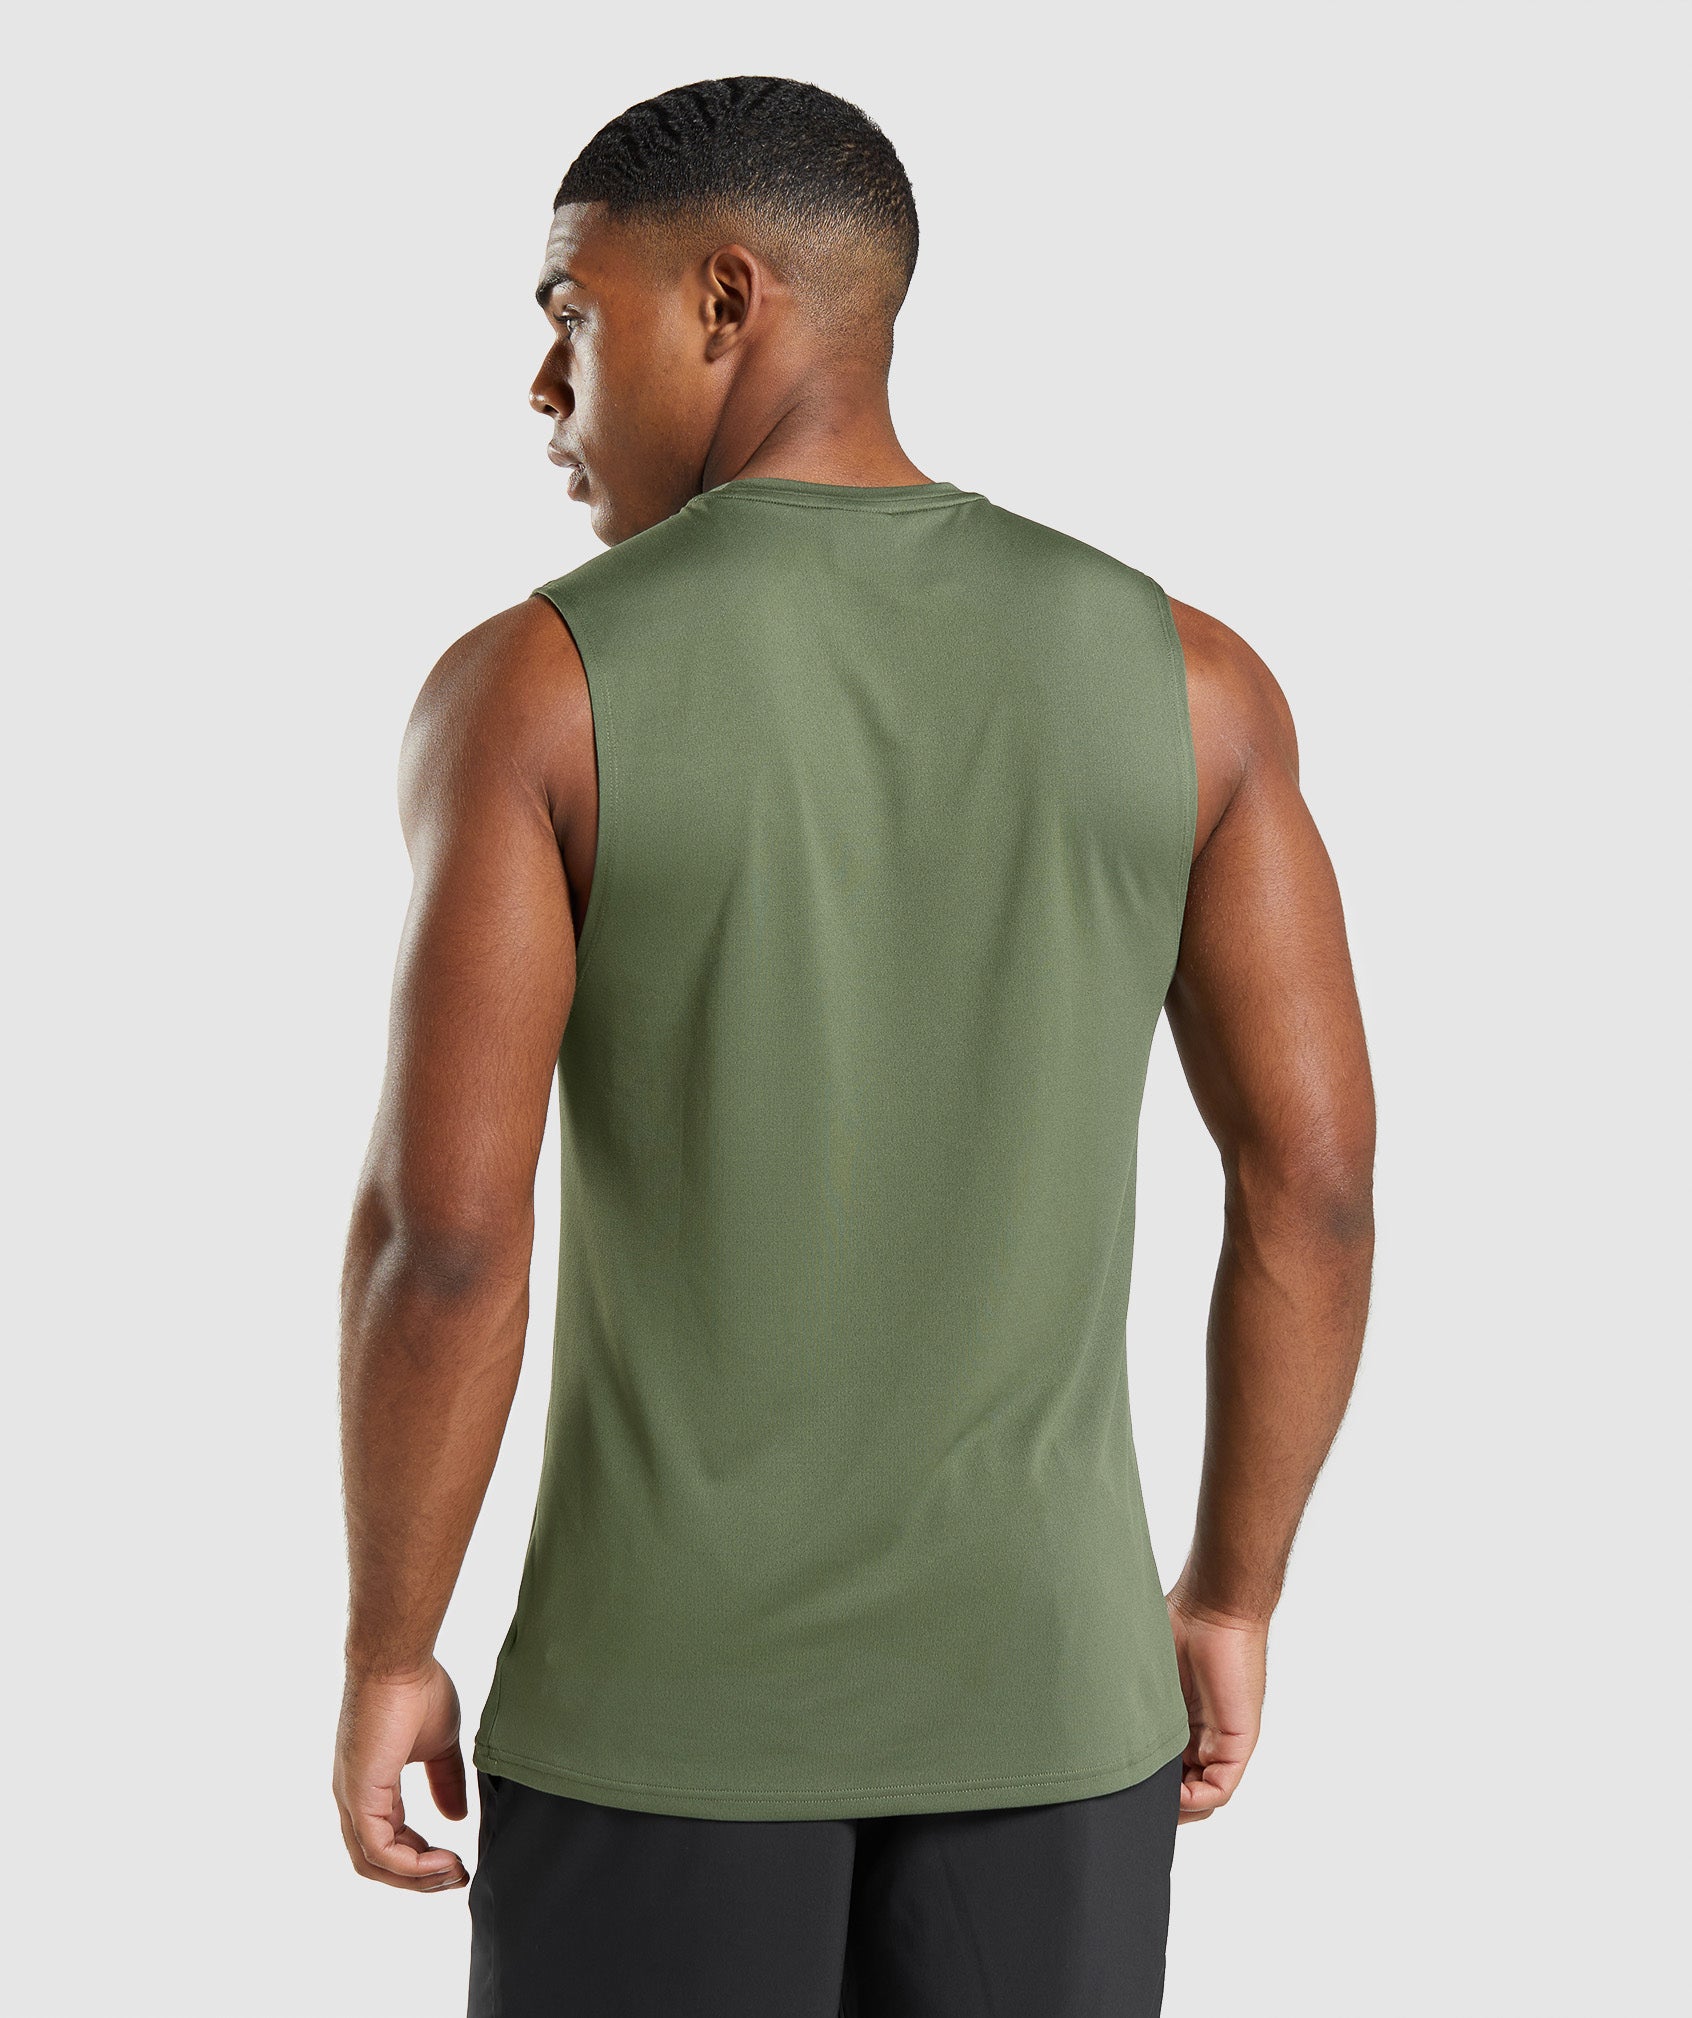 Arrival Sleeveless T-Shirt in Core Olive - view 3